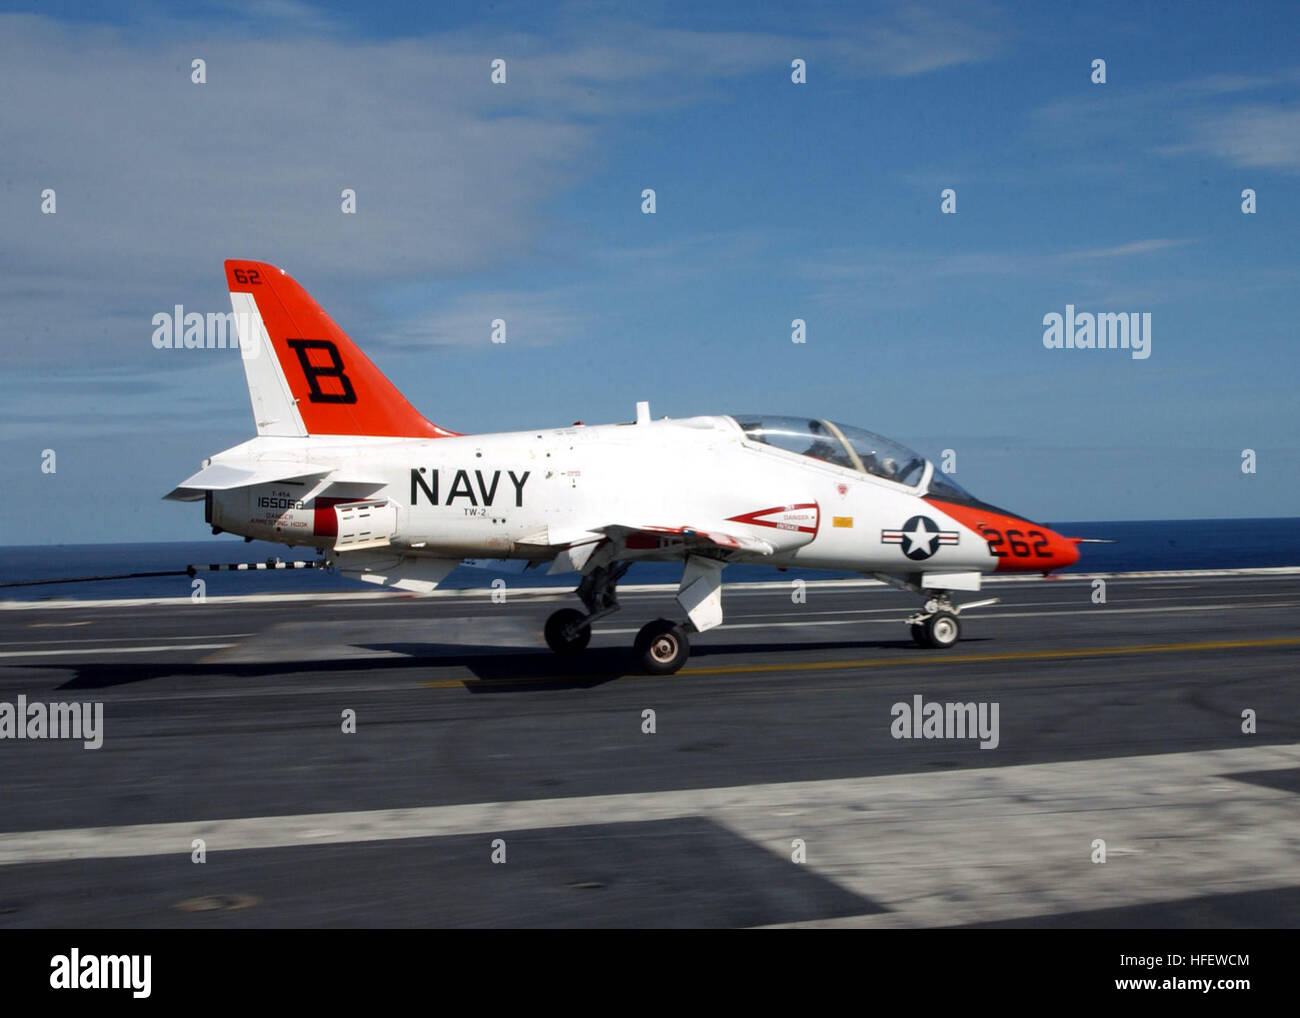 040303-N-4757S-114 Atlantic Ocean (Mar. 3, 2004) Ð A T-45C Goshawk assigned to Training Air Wing Two maneuvers the shipÕs flight deck following and arrested landing aboard USS Harry S. Truman (CVN 75).  Harry S. Truman is assisting with carrier qualifications for pilots in training.  The T-45C Goshawk is used for intermediate and advanced portions of the Navy pilot training program for jet carrier aviation and tactical strike missions. Truman is currently undergoing sea trials after completing a six month Planned Incremental Availability (PIA) at the Norfolk Naval Shipyard. U.S. Navy photo by  Stock Photo